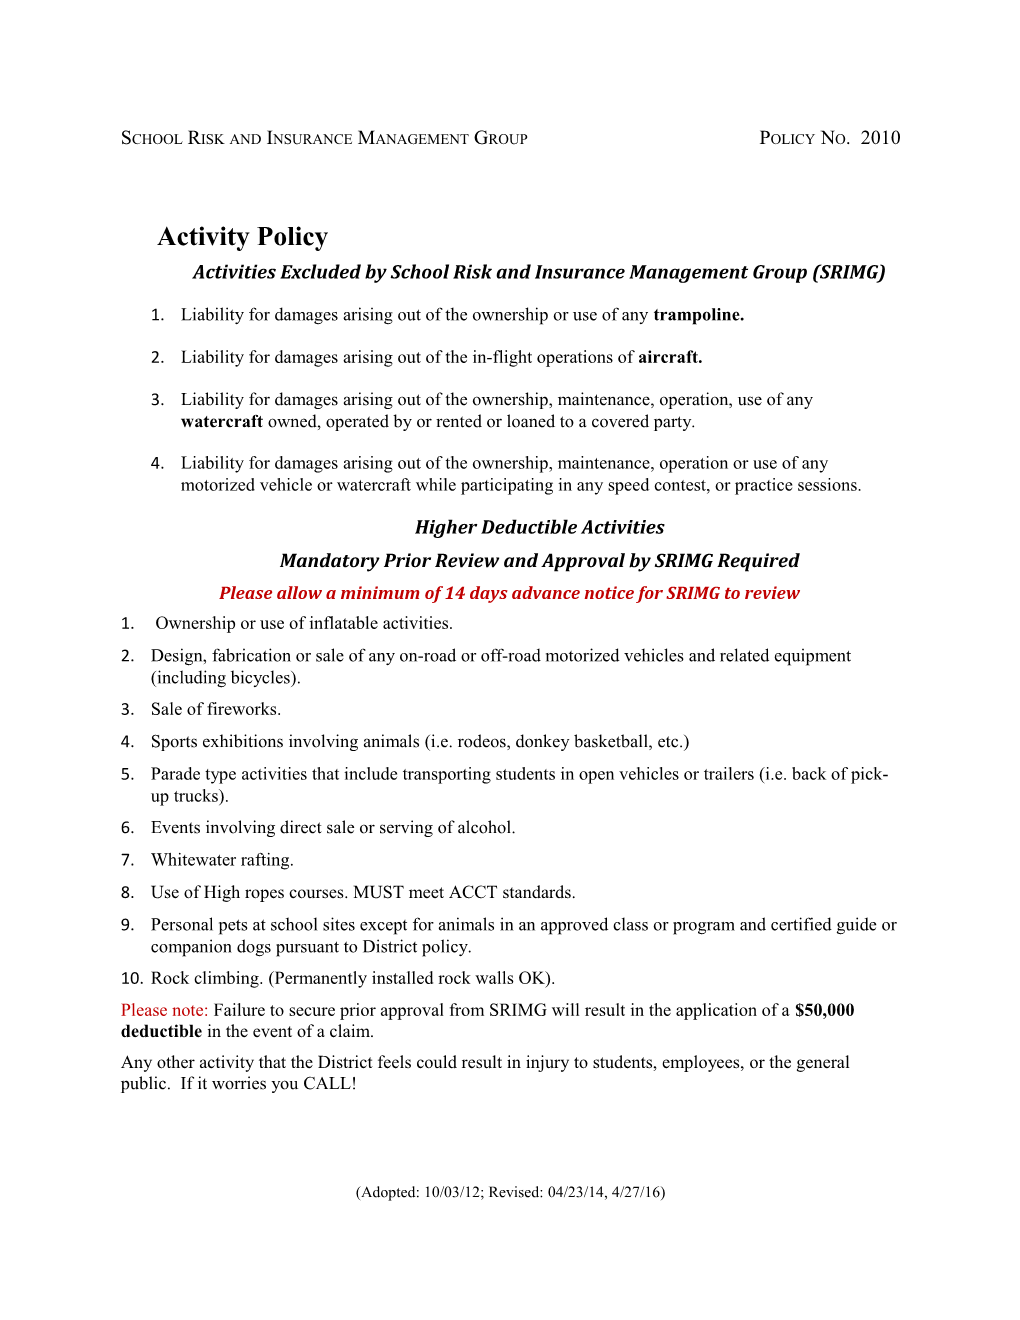 School Risk and Insurance Management Group Policy No. 2010